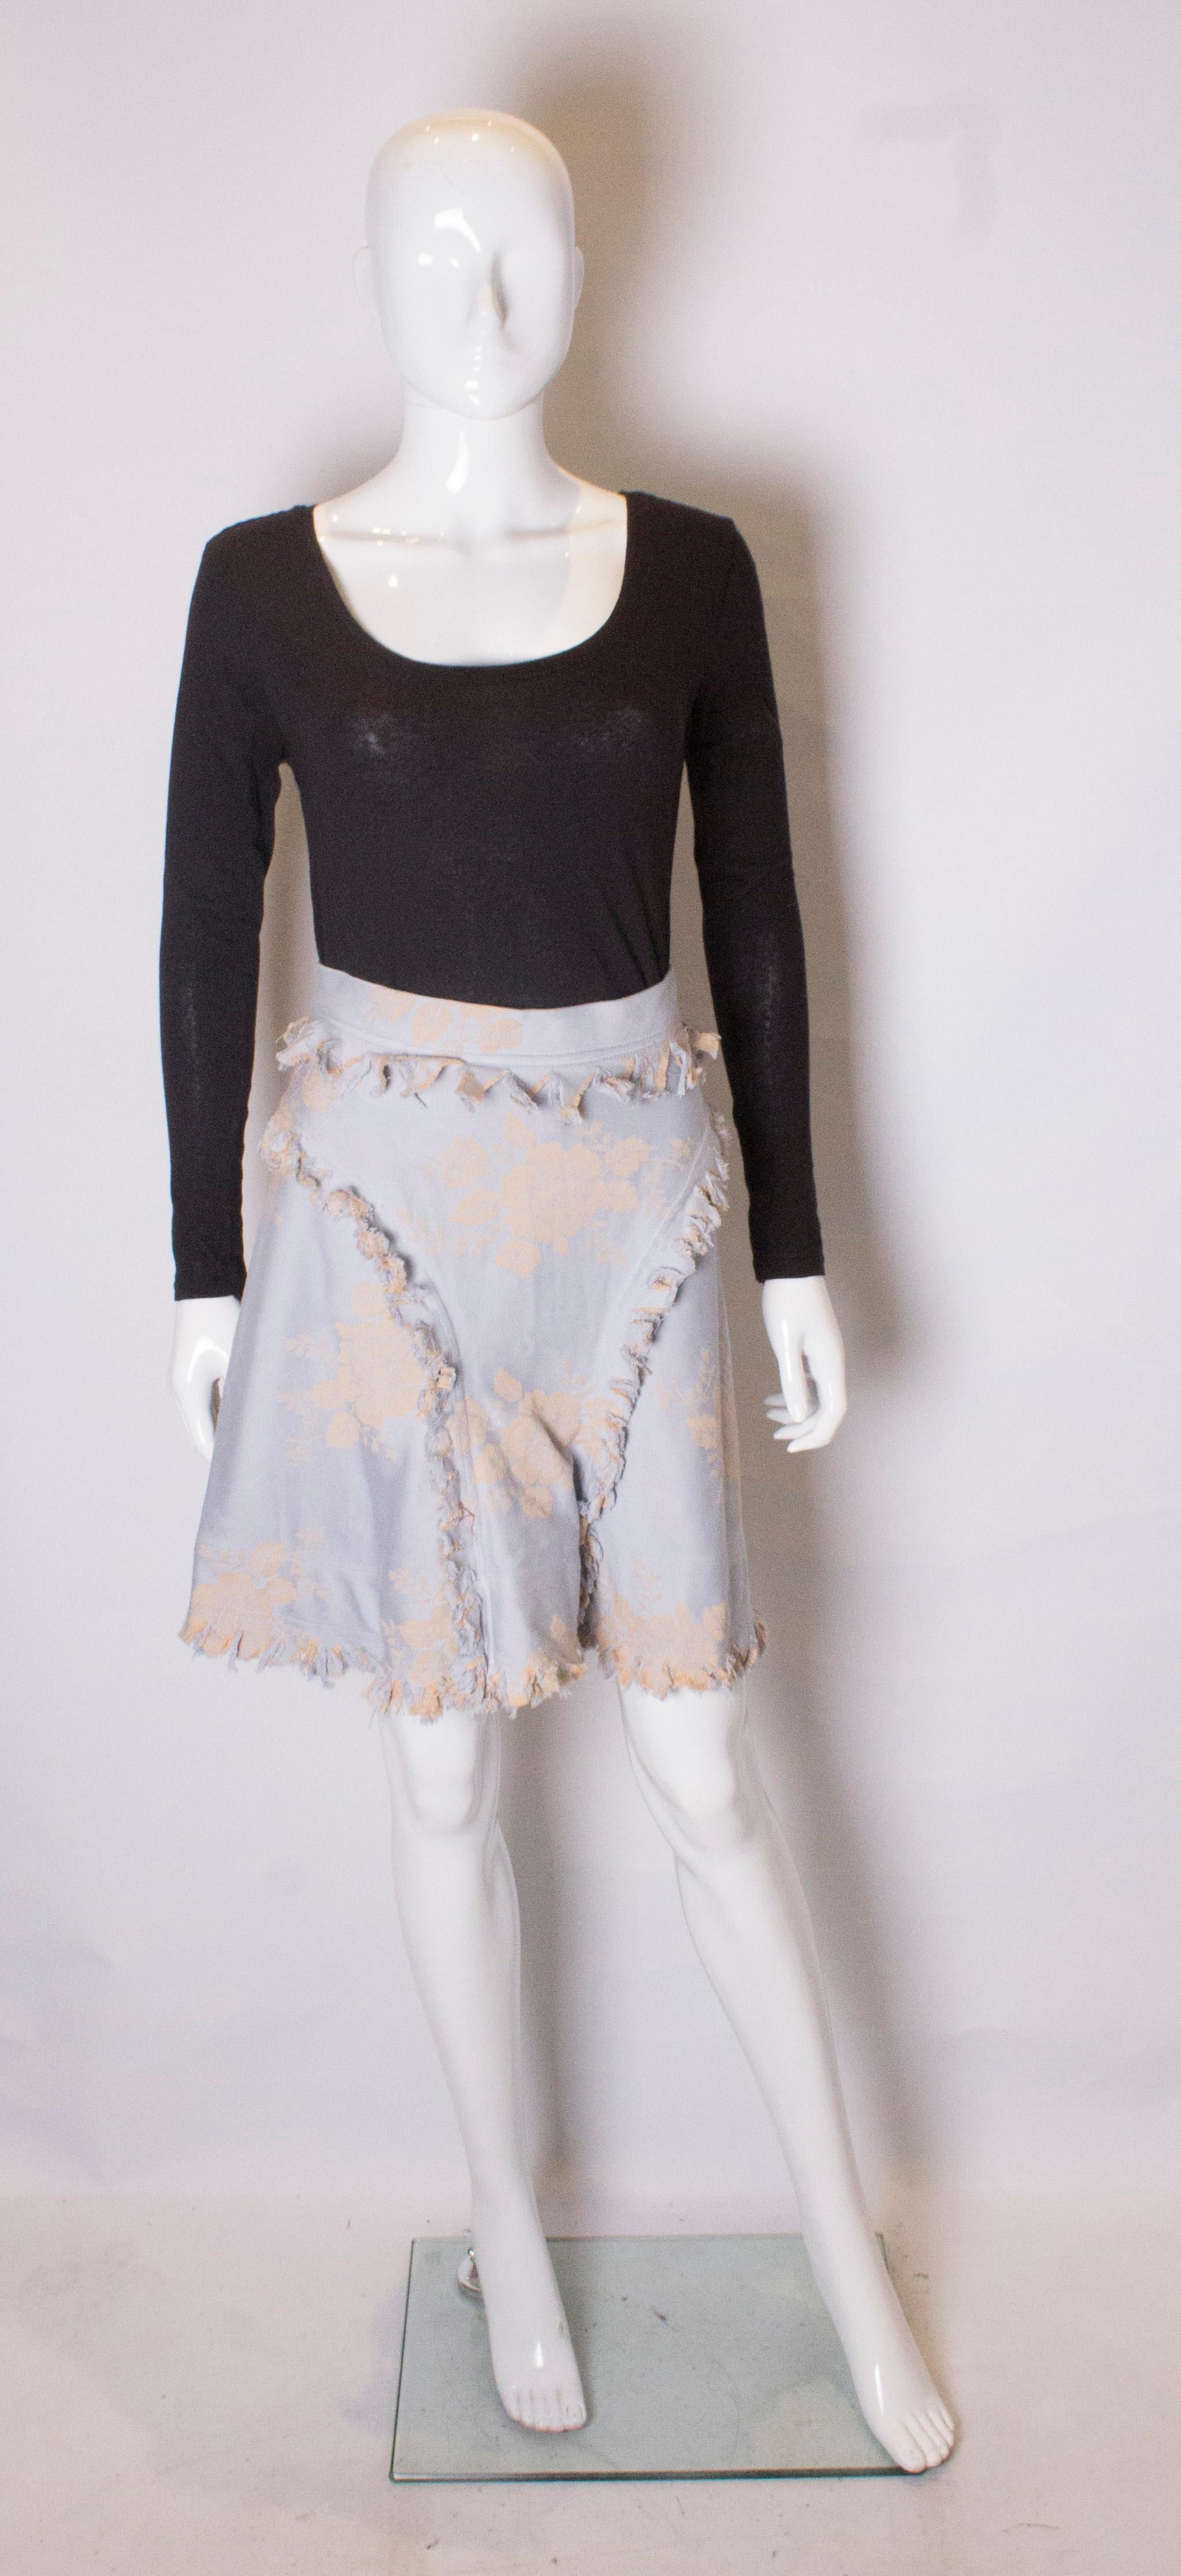 A pretty skirt by Vivienne Westwood , Gold label. The skirt is made of cotton, in a pretty sky blue and gold print.It has decorative fringing on the front and back and a concealed zip opening.